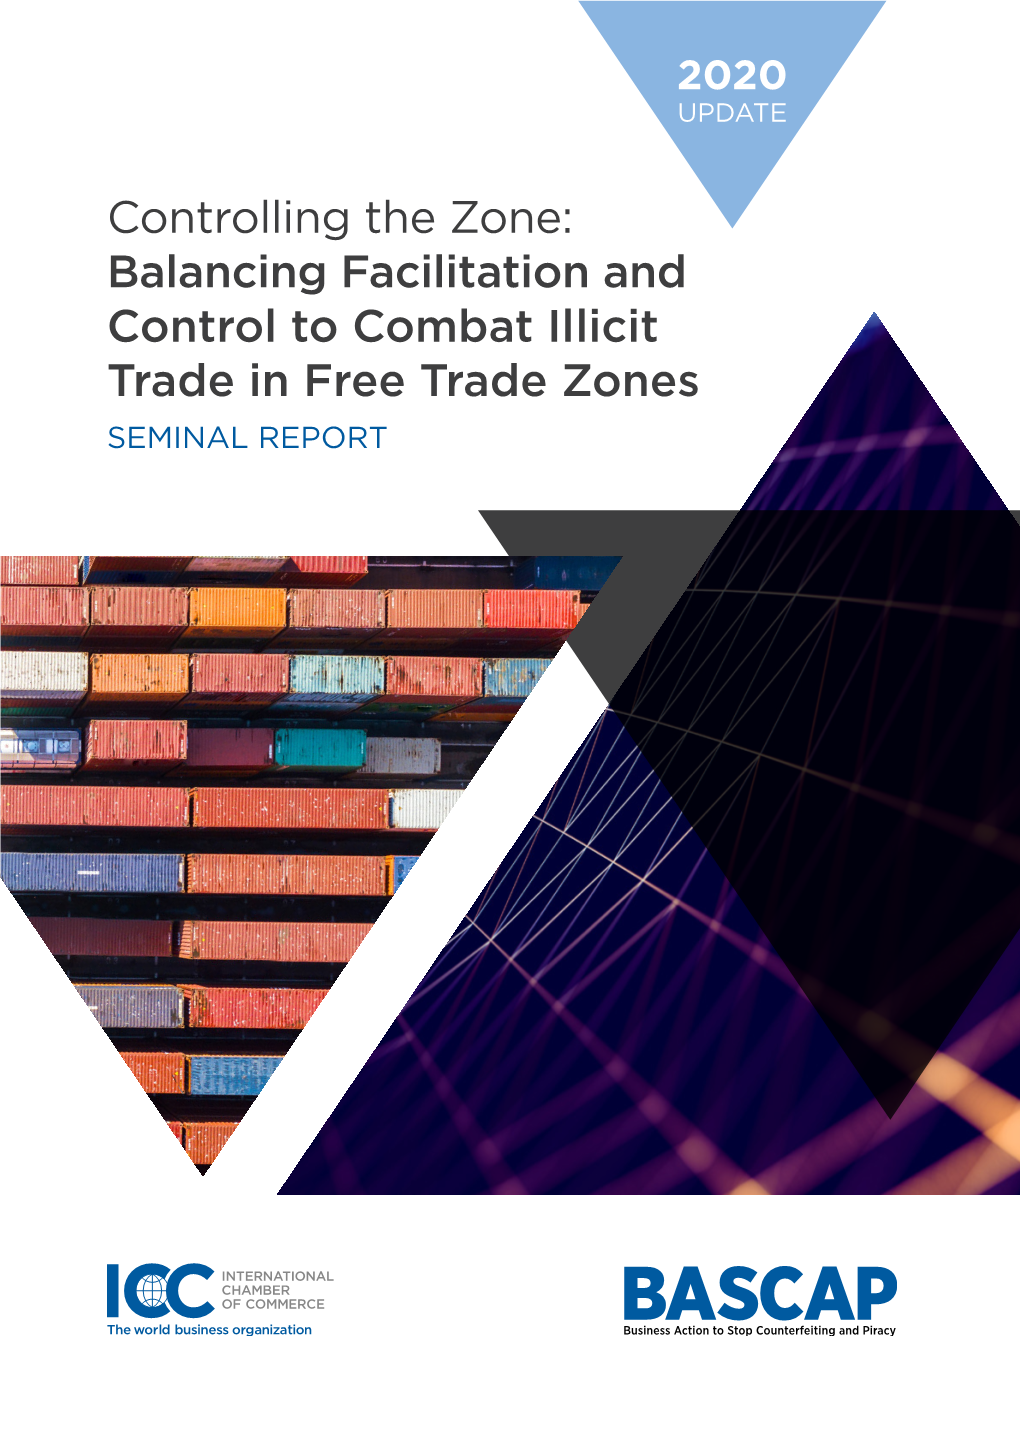 Balancing Facilitation and Control to Combat Illicit Trade in the World's